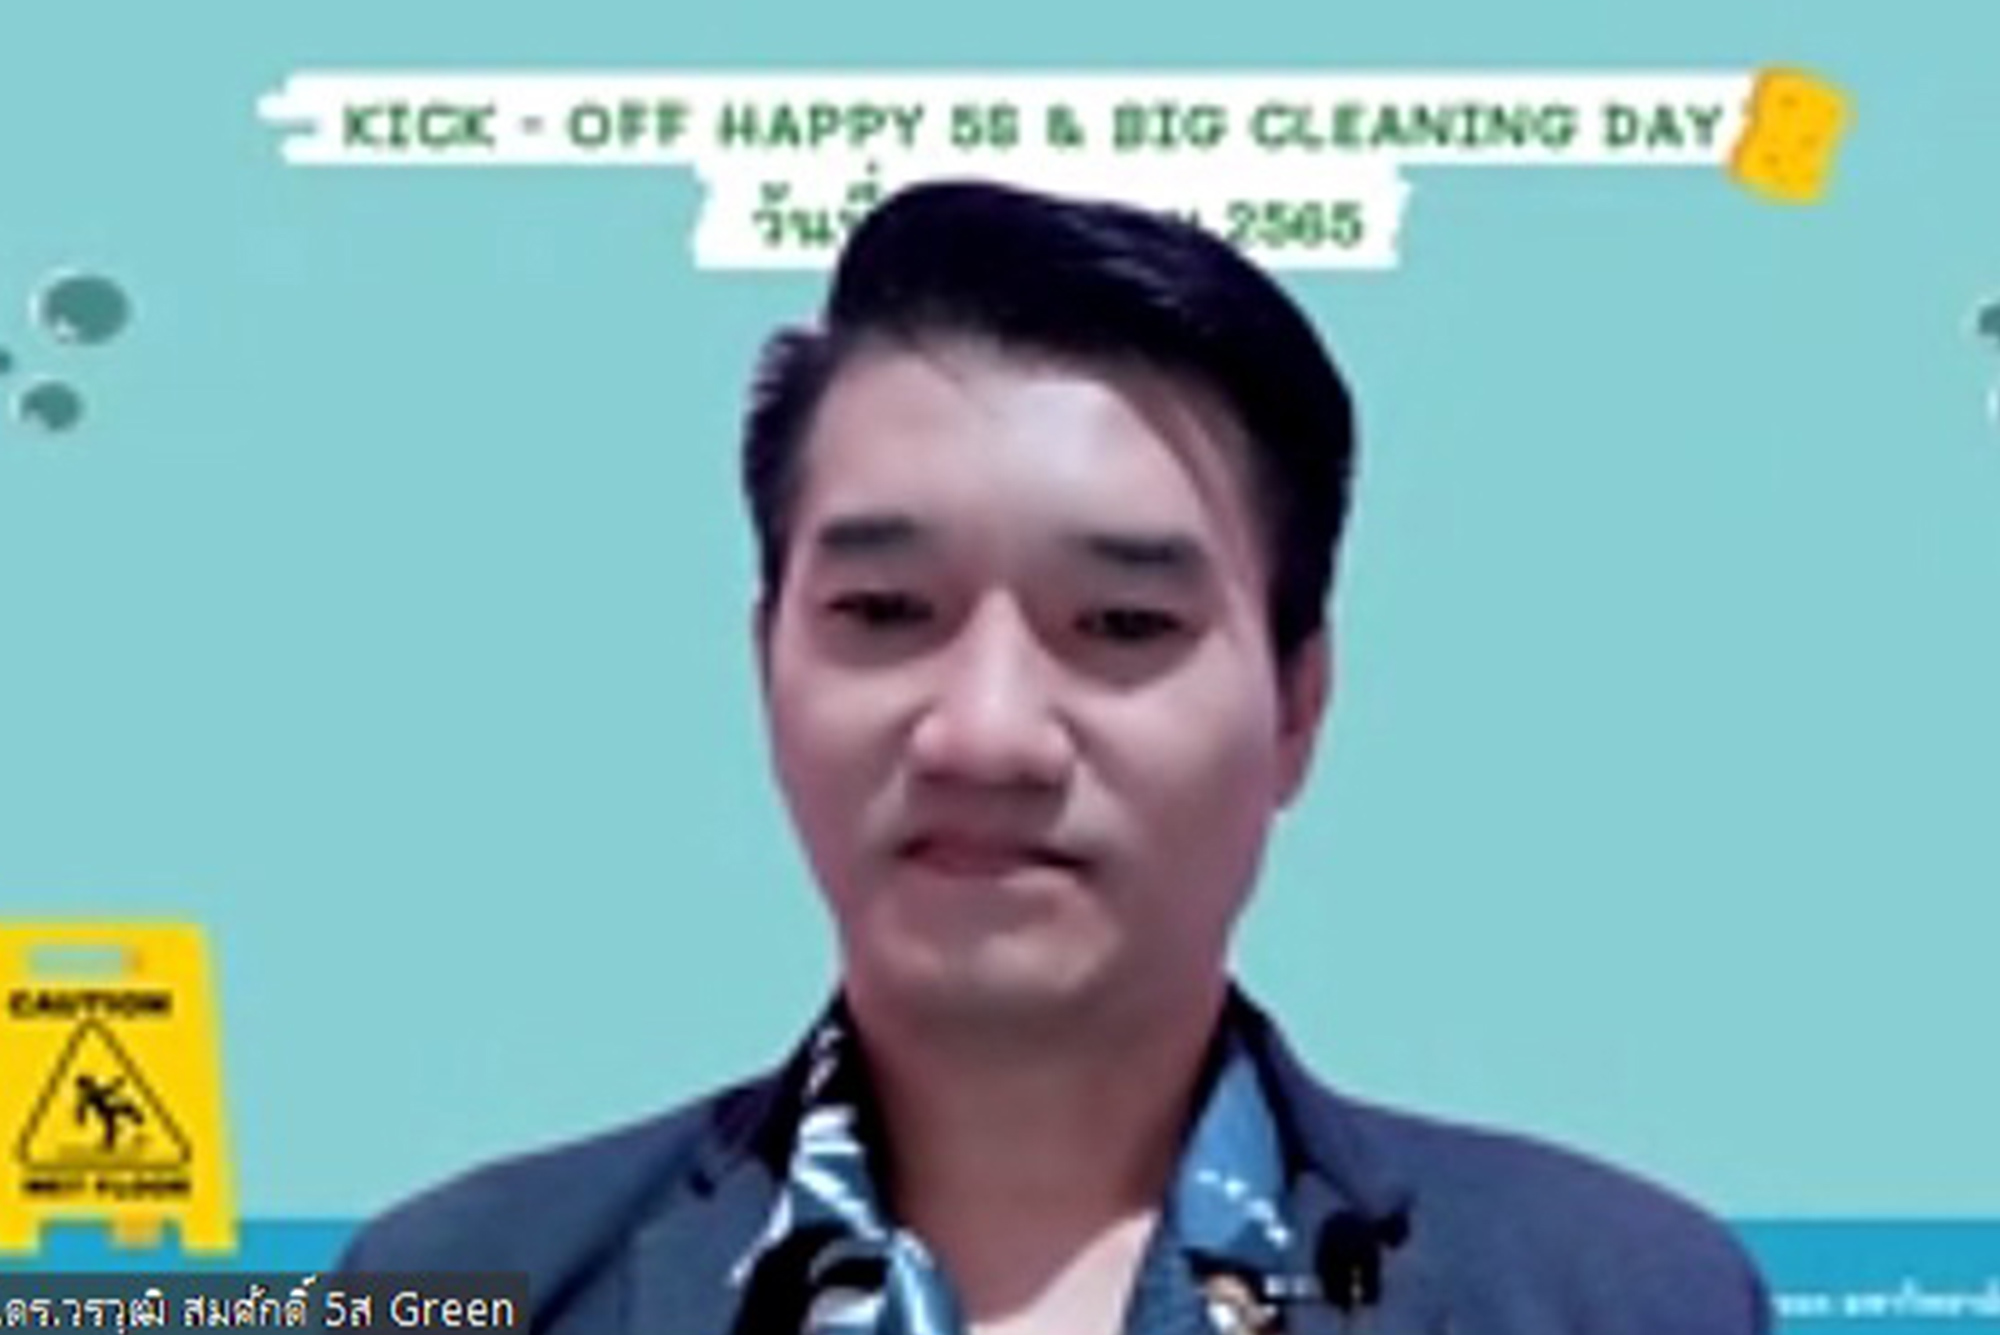 Kick off Happy 5S Green & Big Cleaning Day